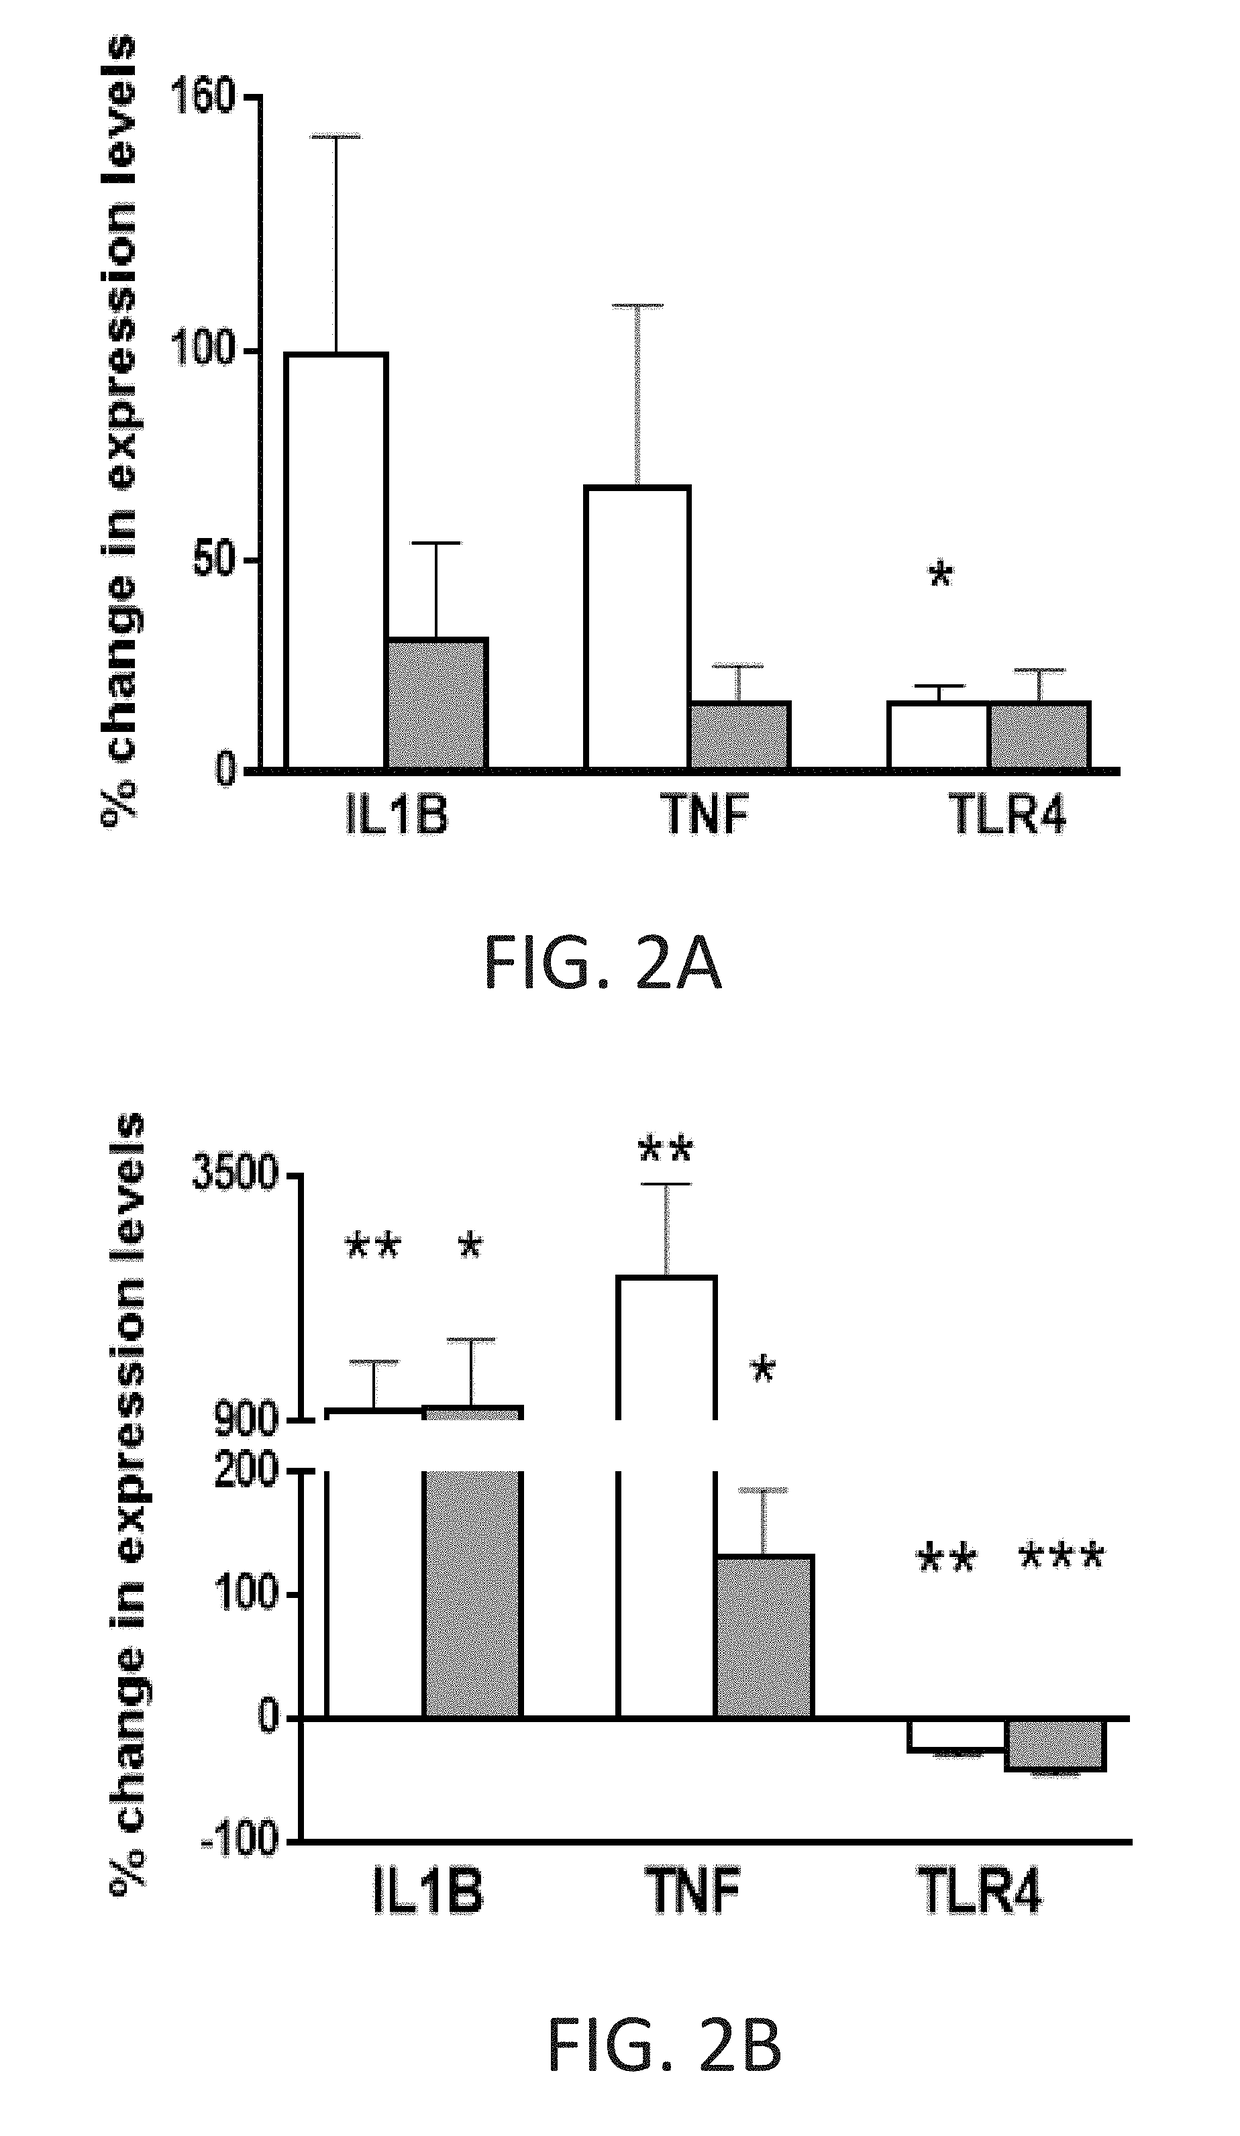 Enhanced immune response in cattle upon treatment with nitric oxide